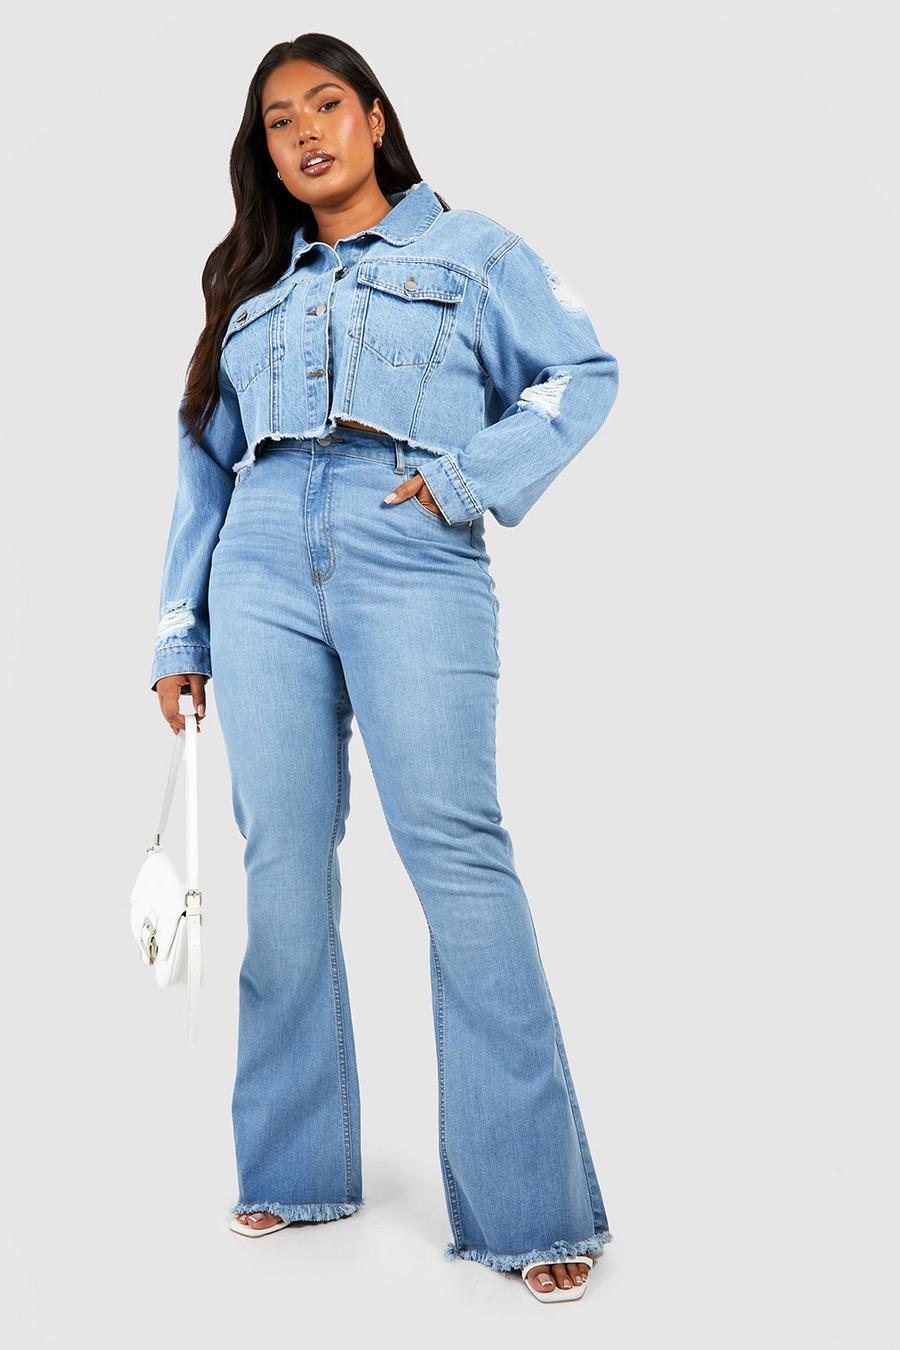 Black Jeans Women Bell Bottom Jeans for Women High Waisted Flare Jeans for  Women Stretchy Bell Bottoms Pants, Light Blue, X-Large : :  Clothing, Shoes & Accessories